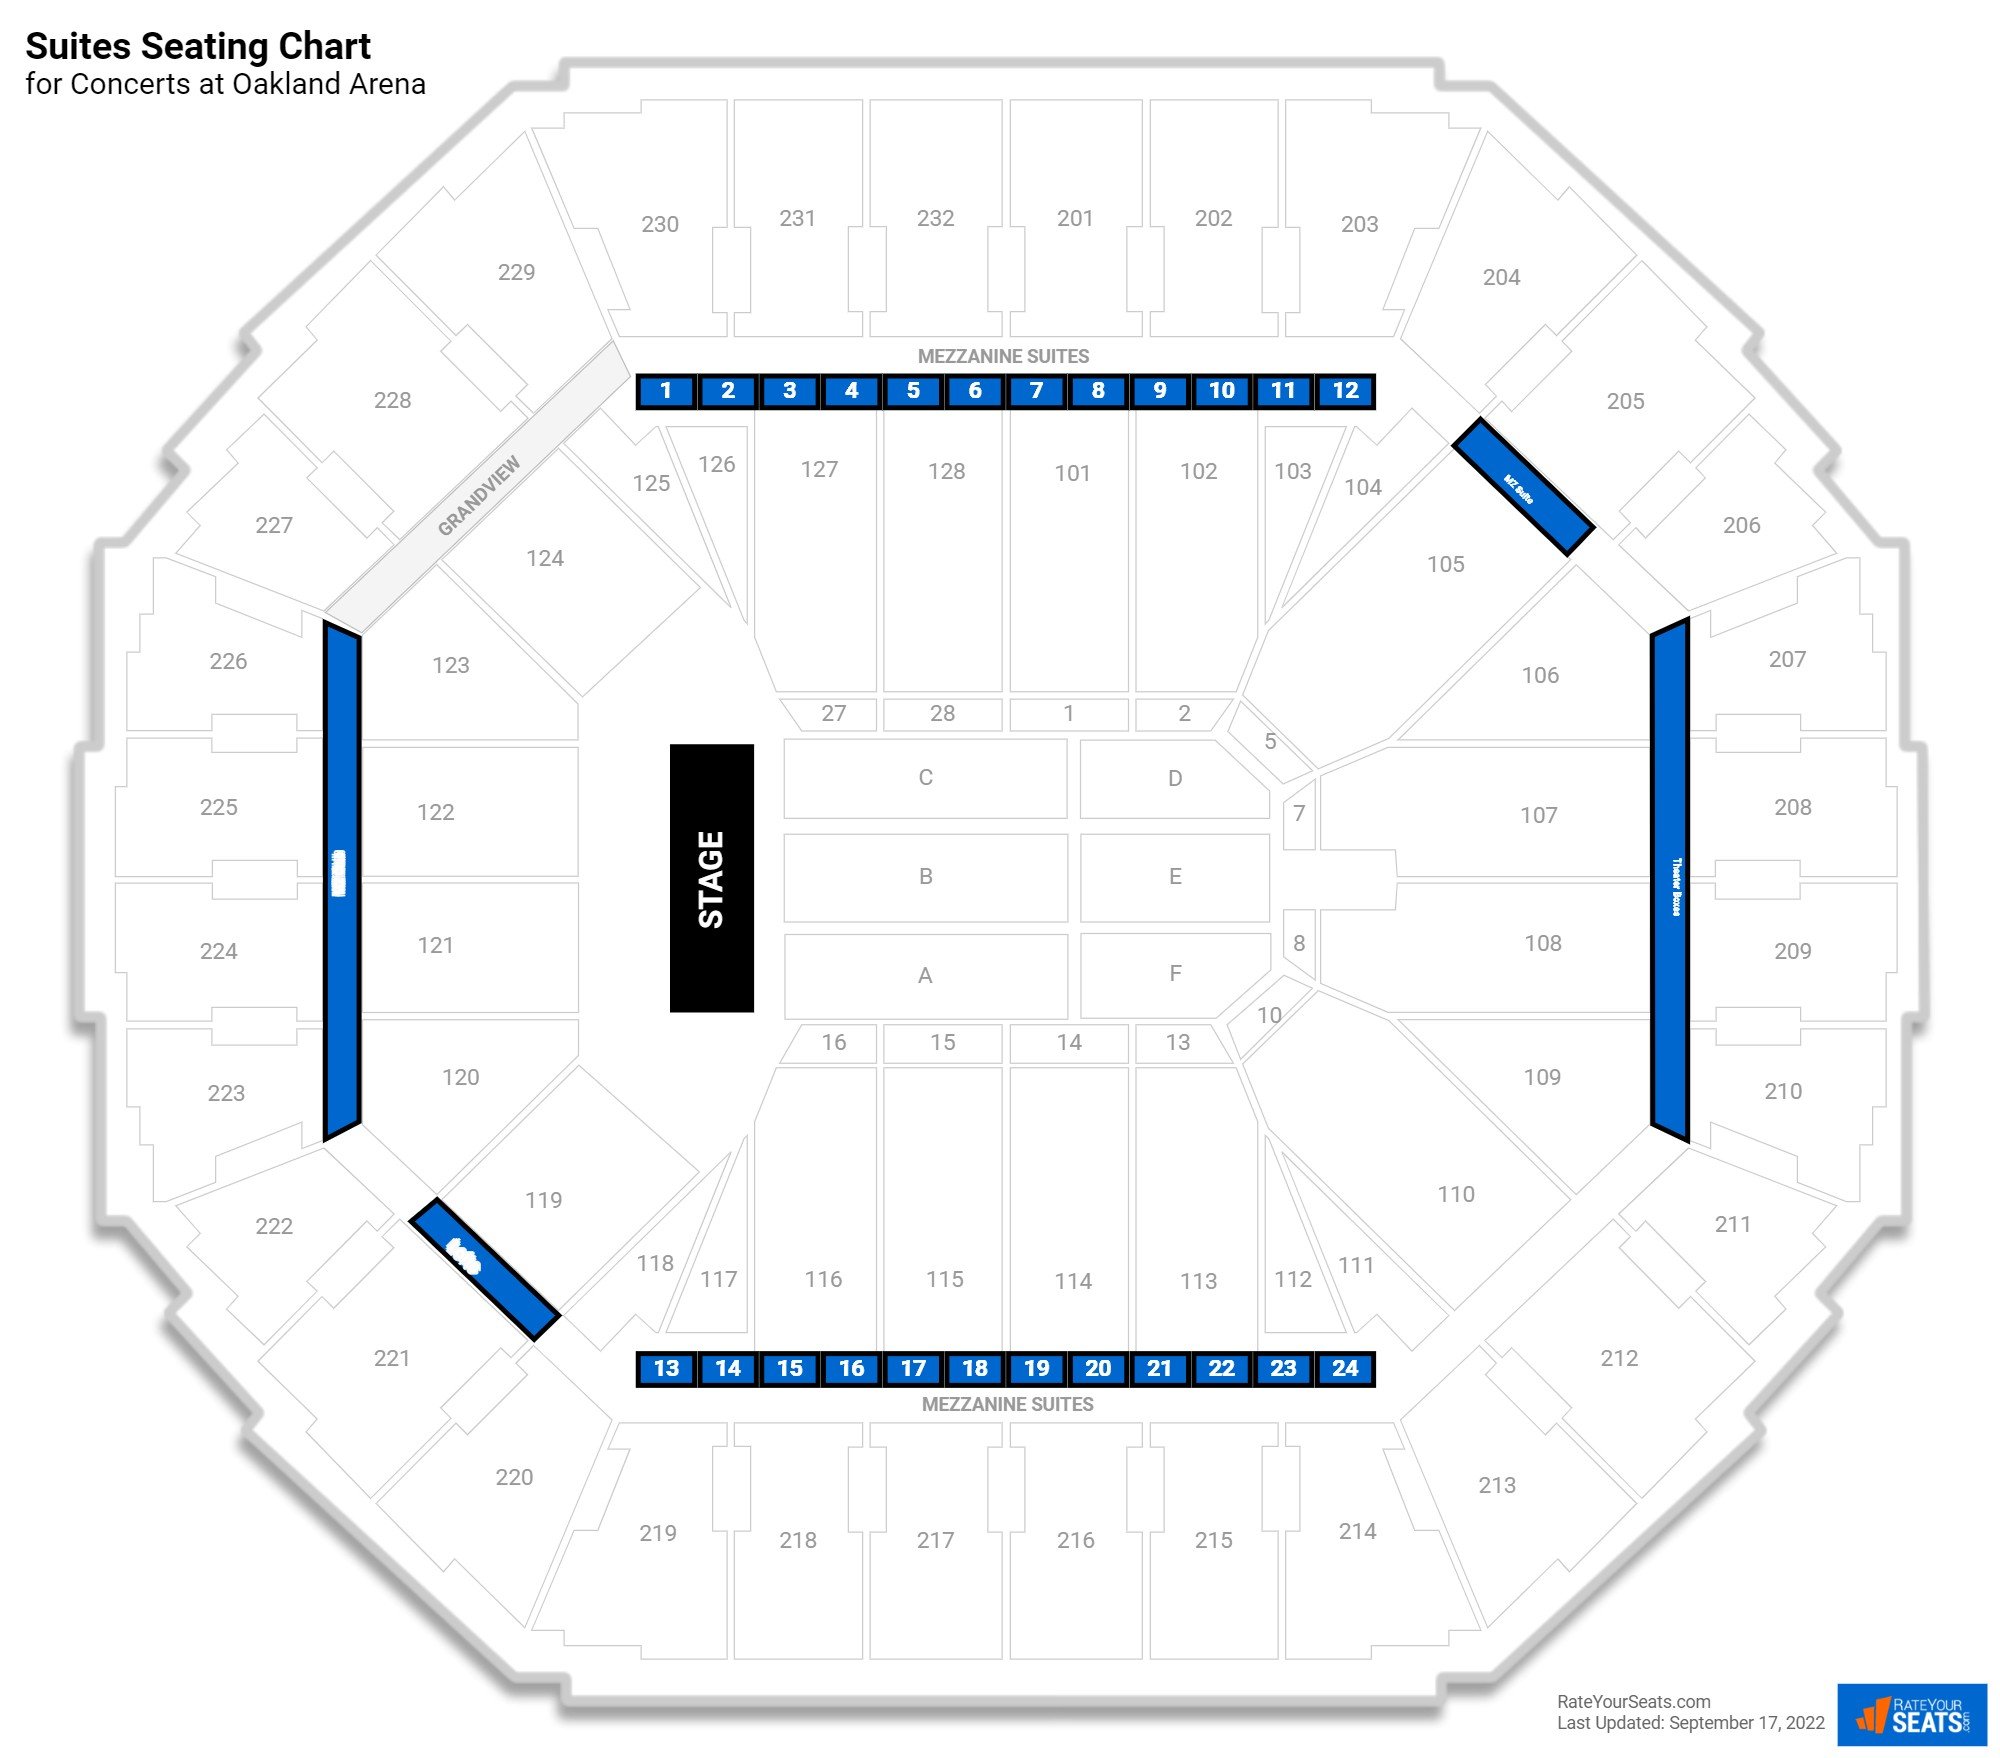 Concert Suites Seating Chart at Oakland Arena